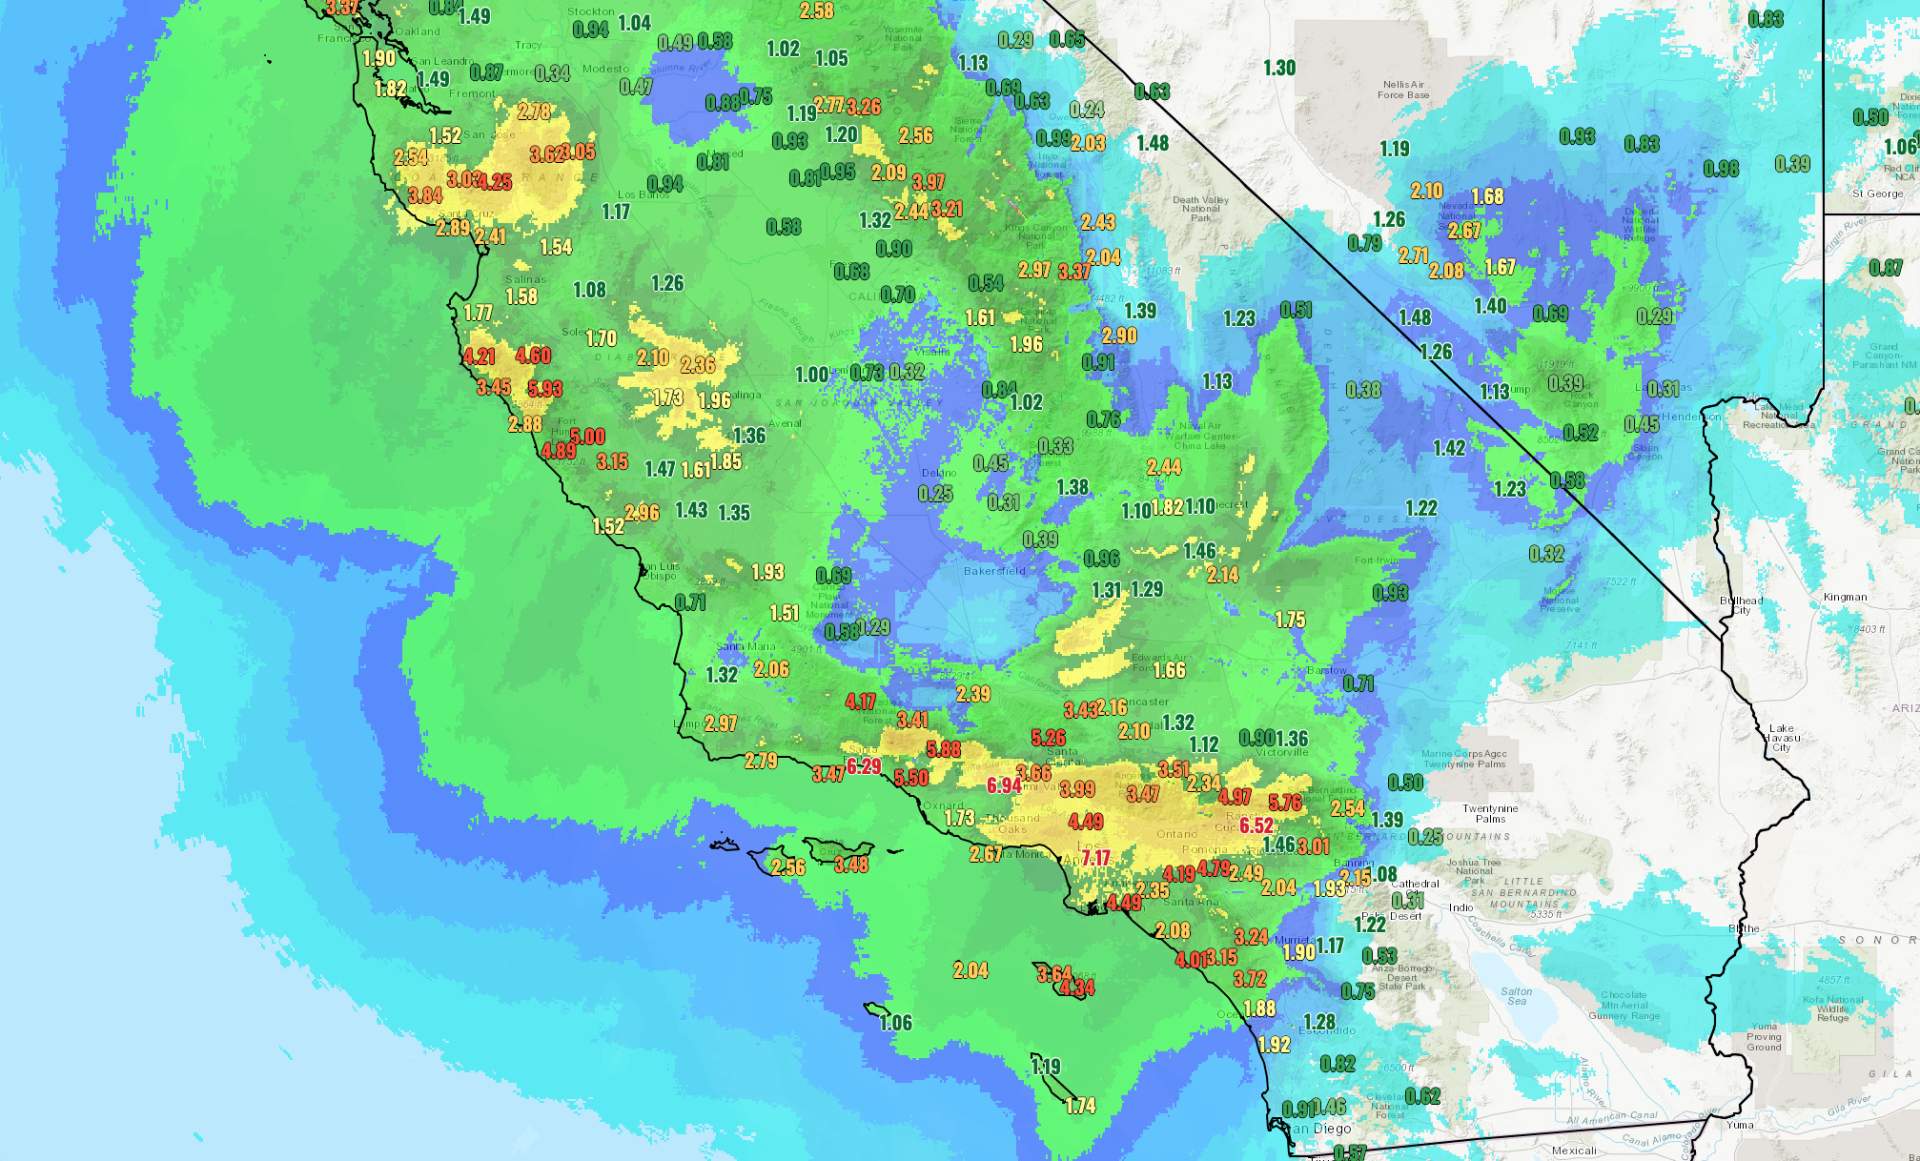 Fig. 1: Precipitation totals for the last 72 hours in inches (1 inch = 25 mm); Source: NWS